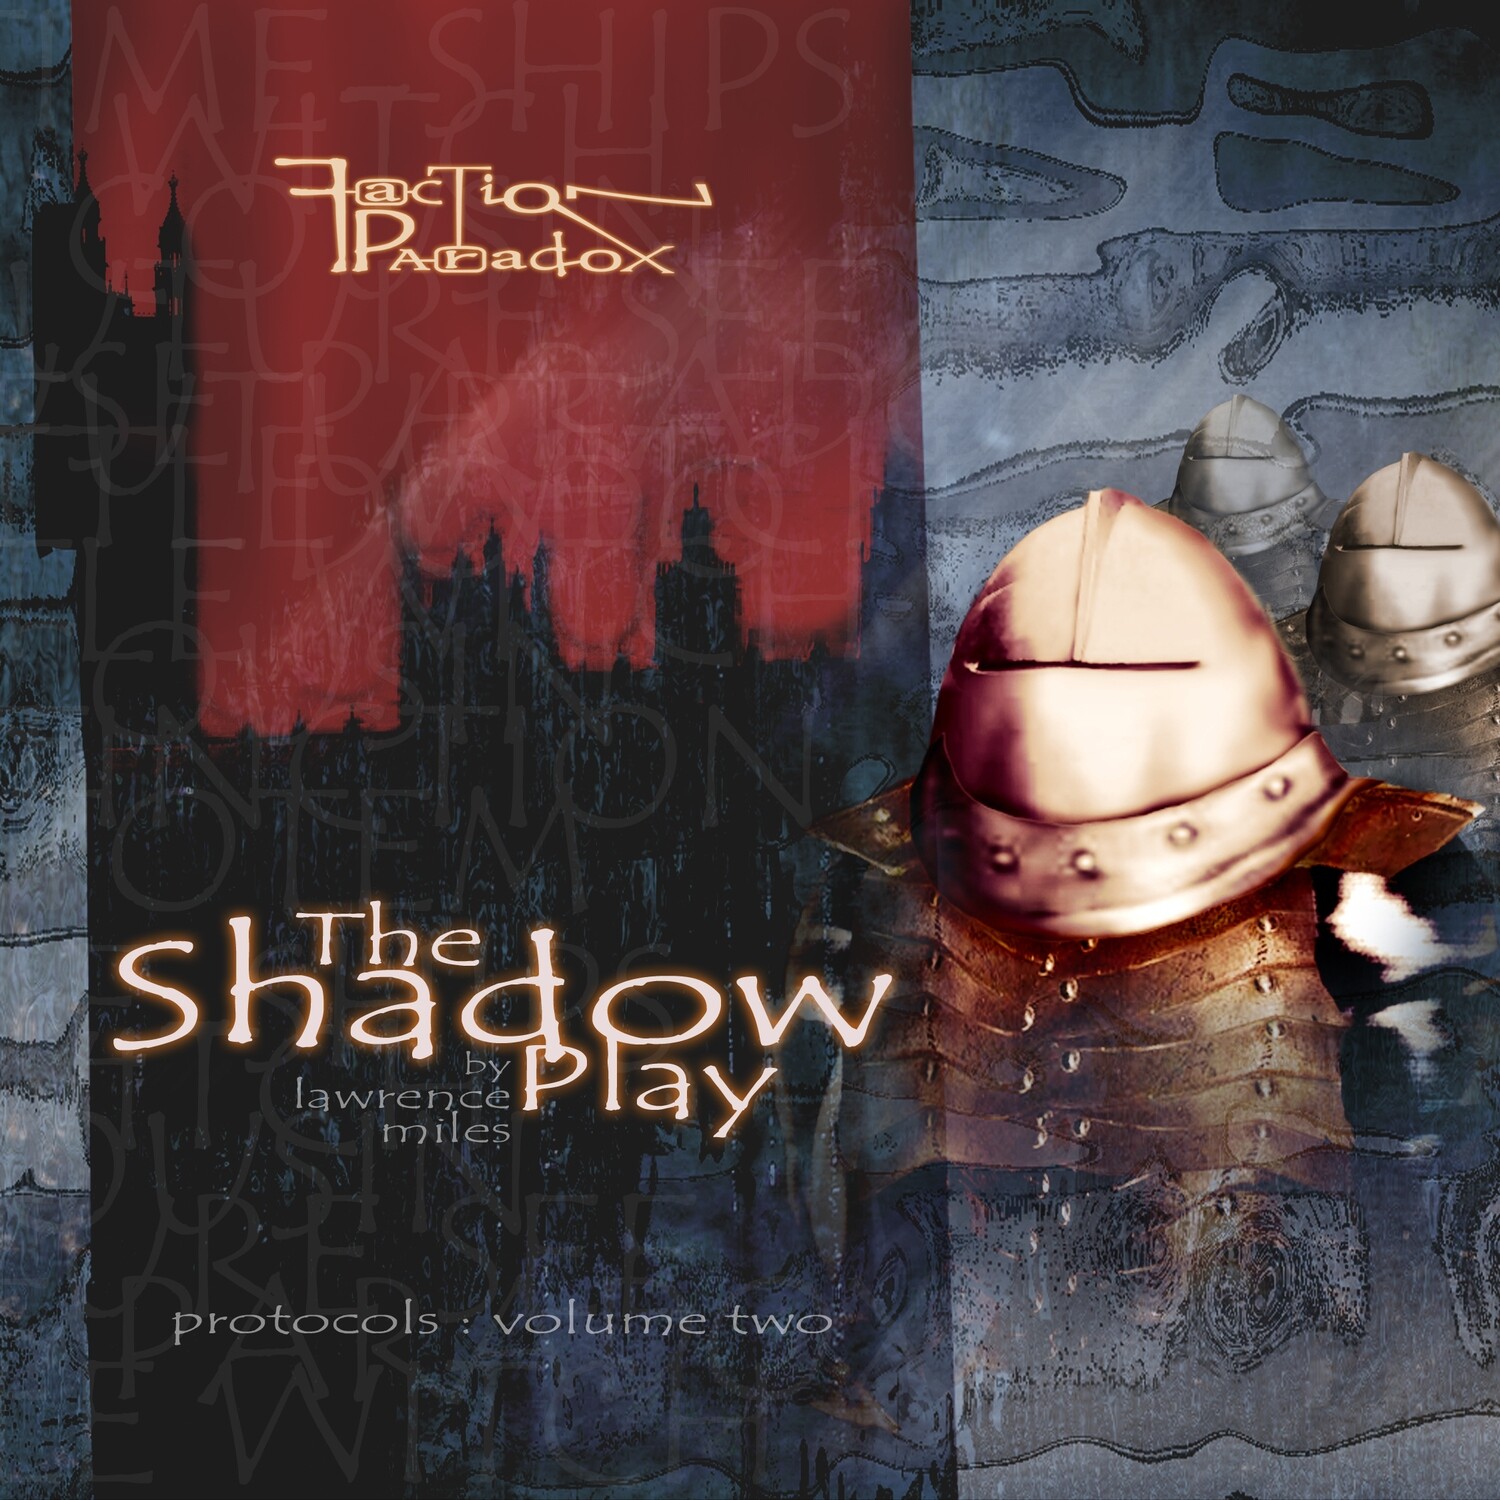 Faction Paradox: The Shadow Play (AUDIO DOWNLOAD)